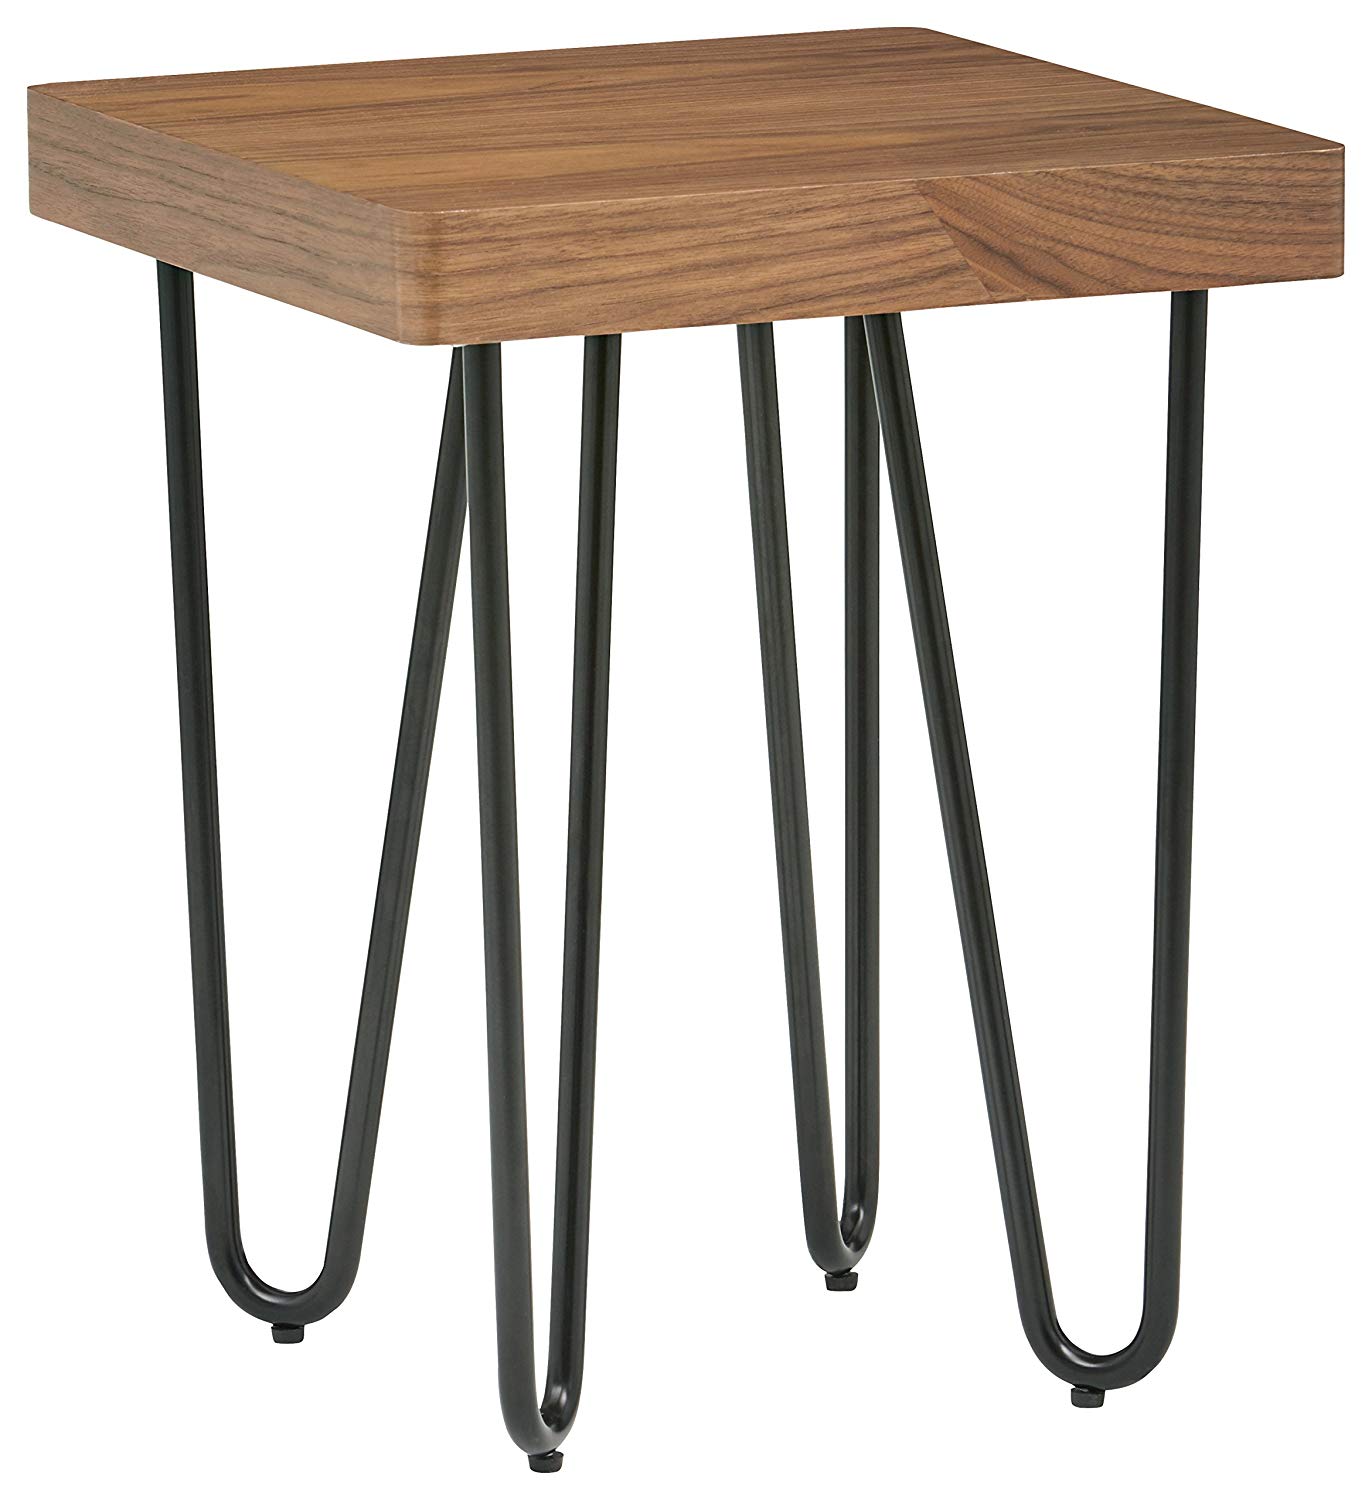 rivet hairpin wood and metal end table walnut black better homes gardens accent rustic gray kitchen dining garden furniture clearance bar pub set prefinished solid hardwood